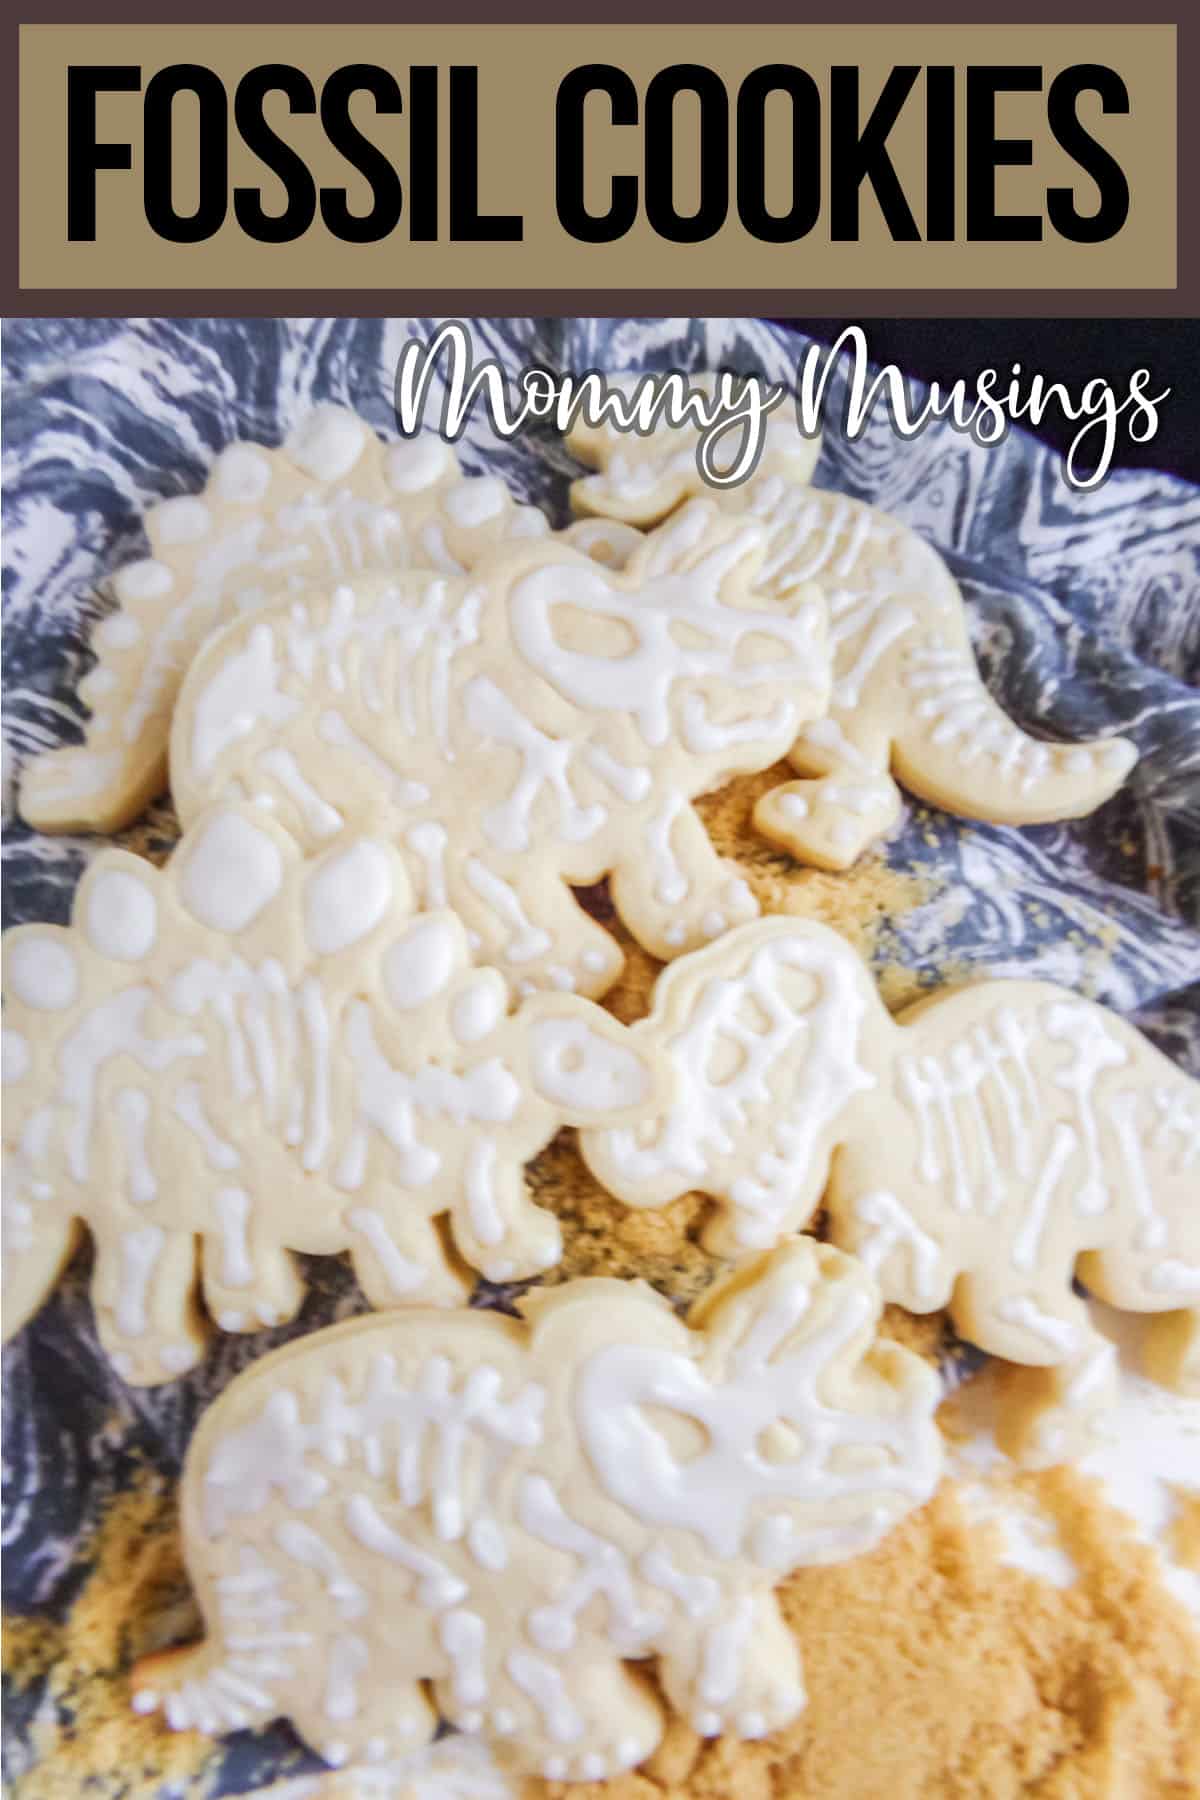 dino fossil flood cookies with text which reads fossil cookies